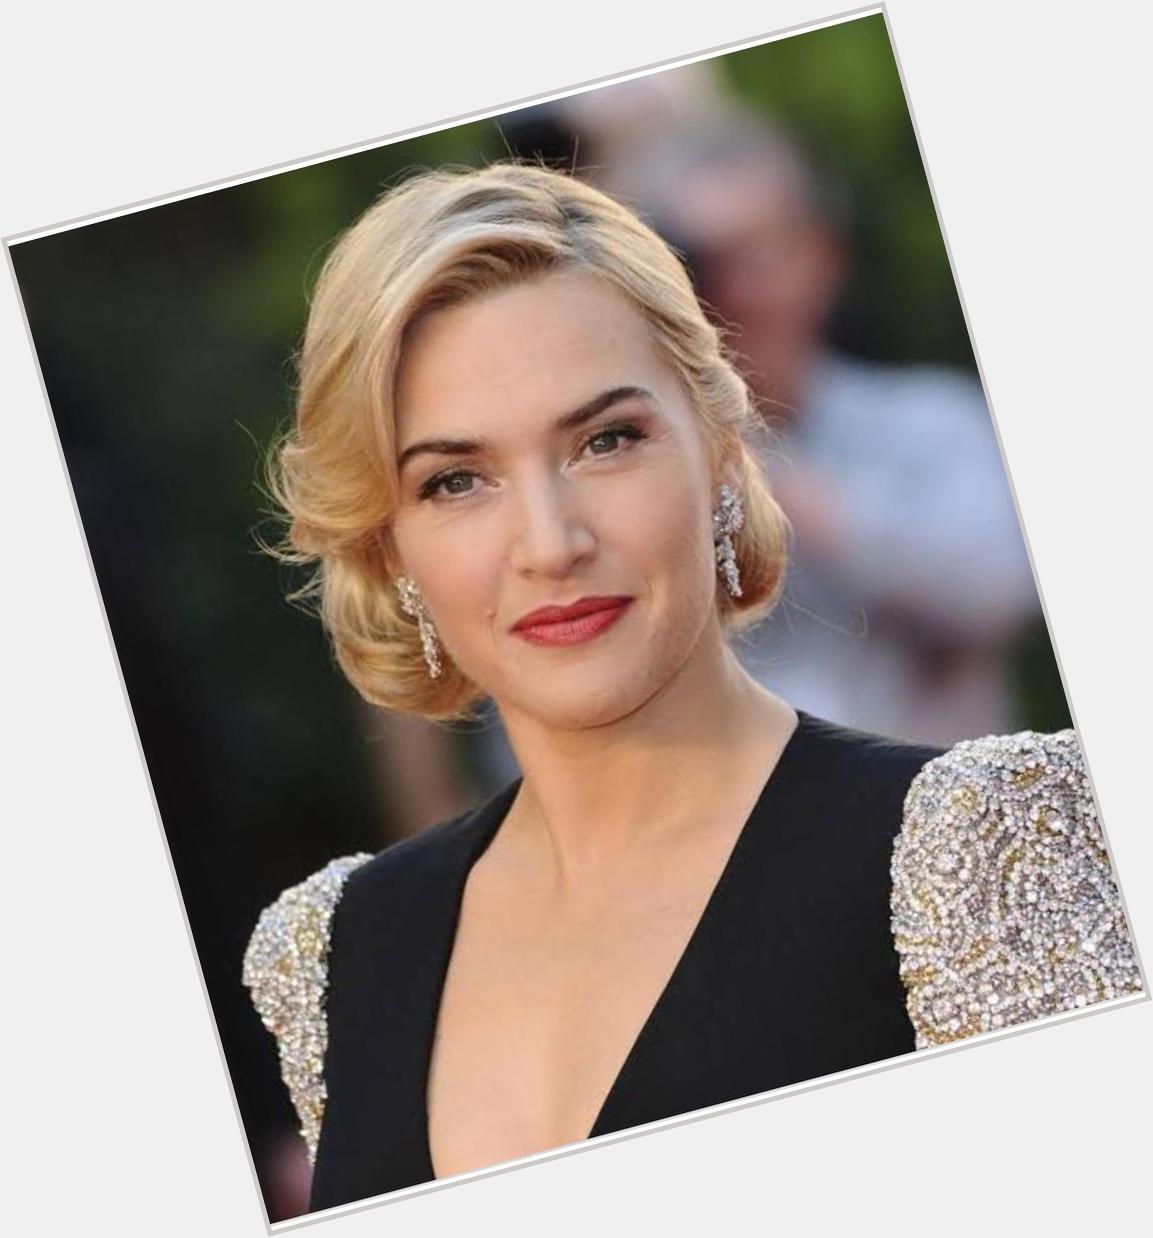 Happy birthday Kate Winslet!!!!

One of the most most and leading ladies in Hollywood. 